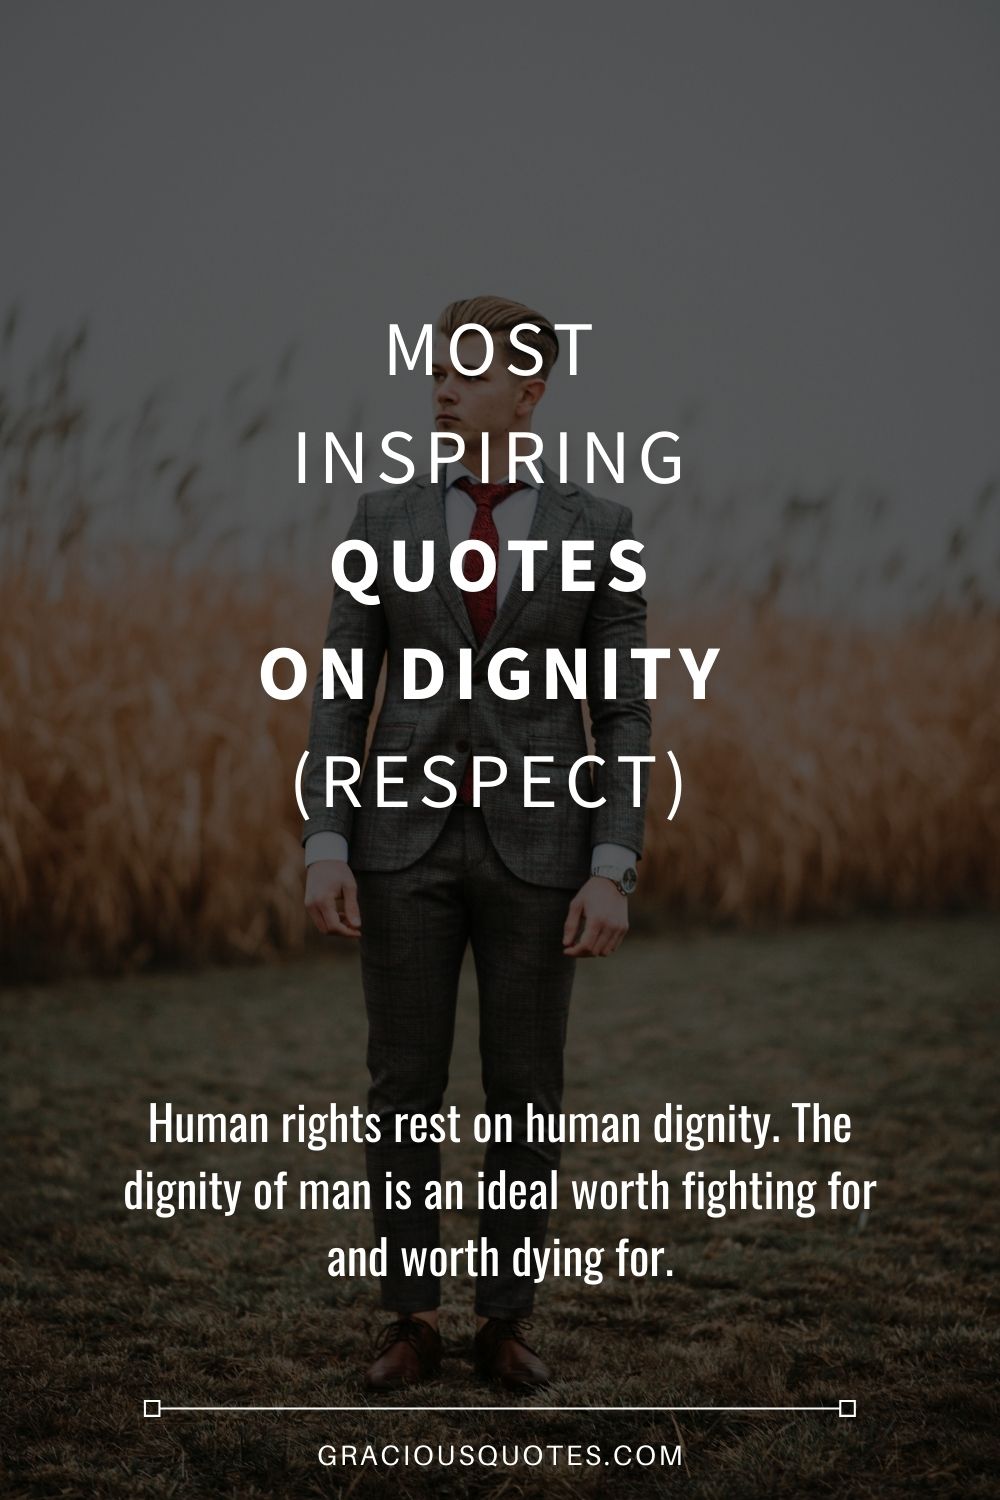 Most Inspiring Quotes on Dignity (RESPECT) - Gracious Quotes